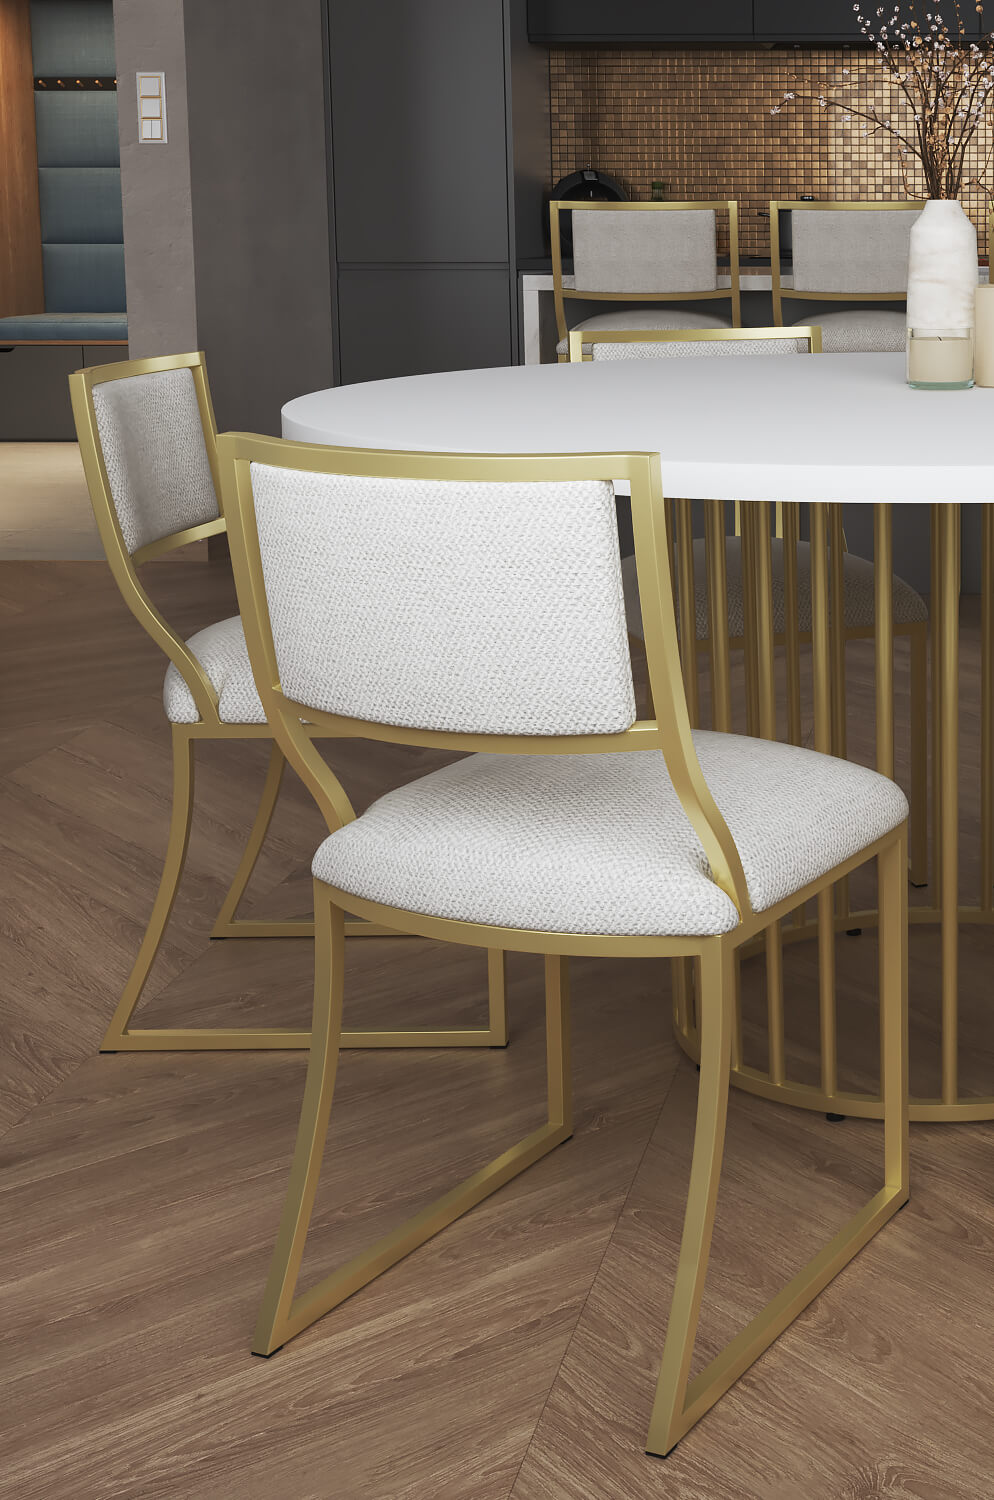 Wesley Allen's Ki Modern Gold and White Chair in Dining Room